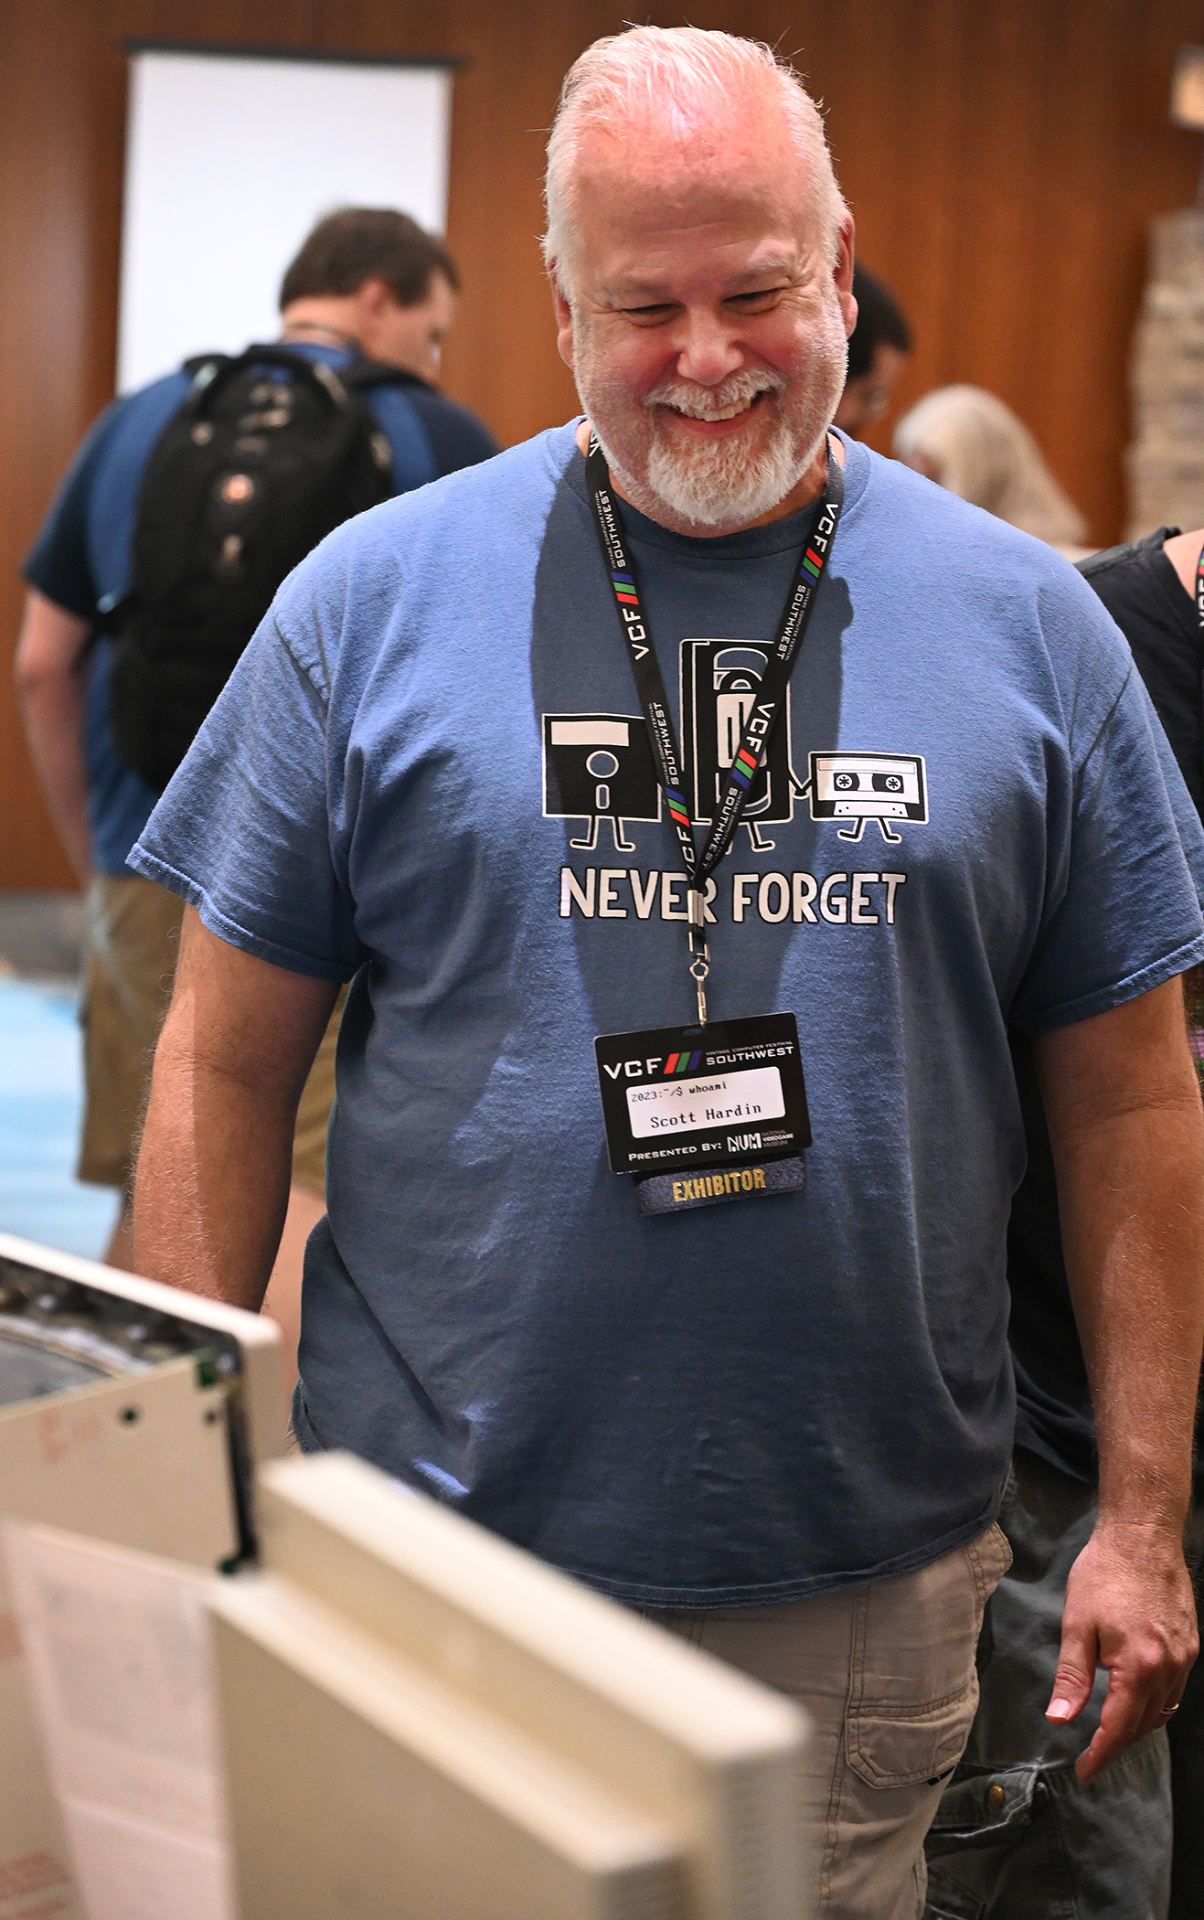 Smiling man in blue t-shirt looking at a vintage computer.